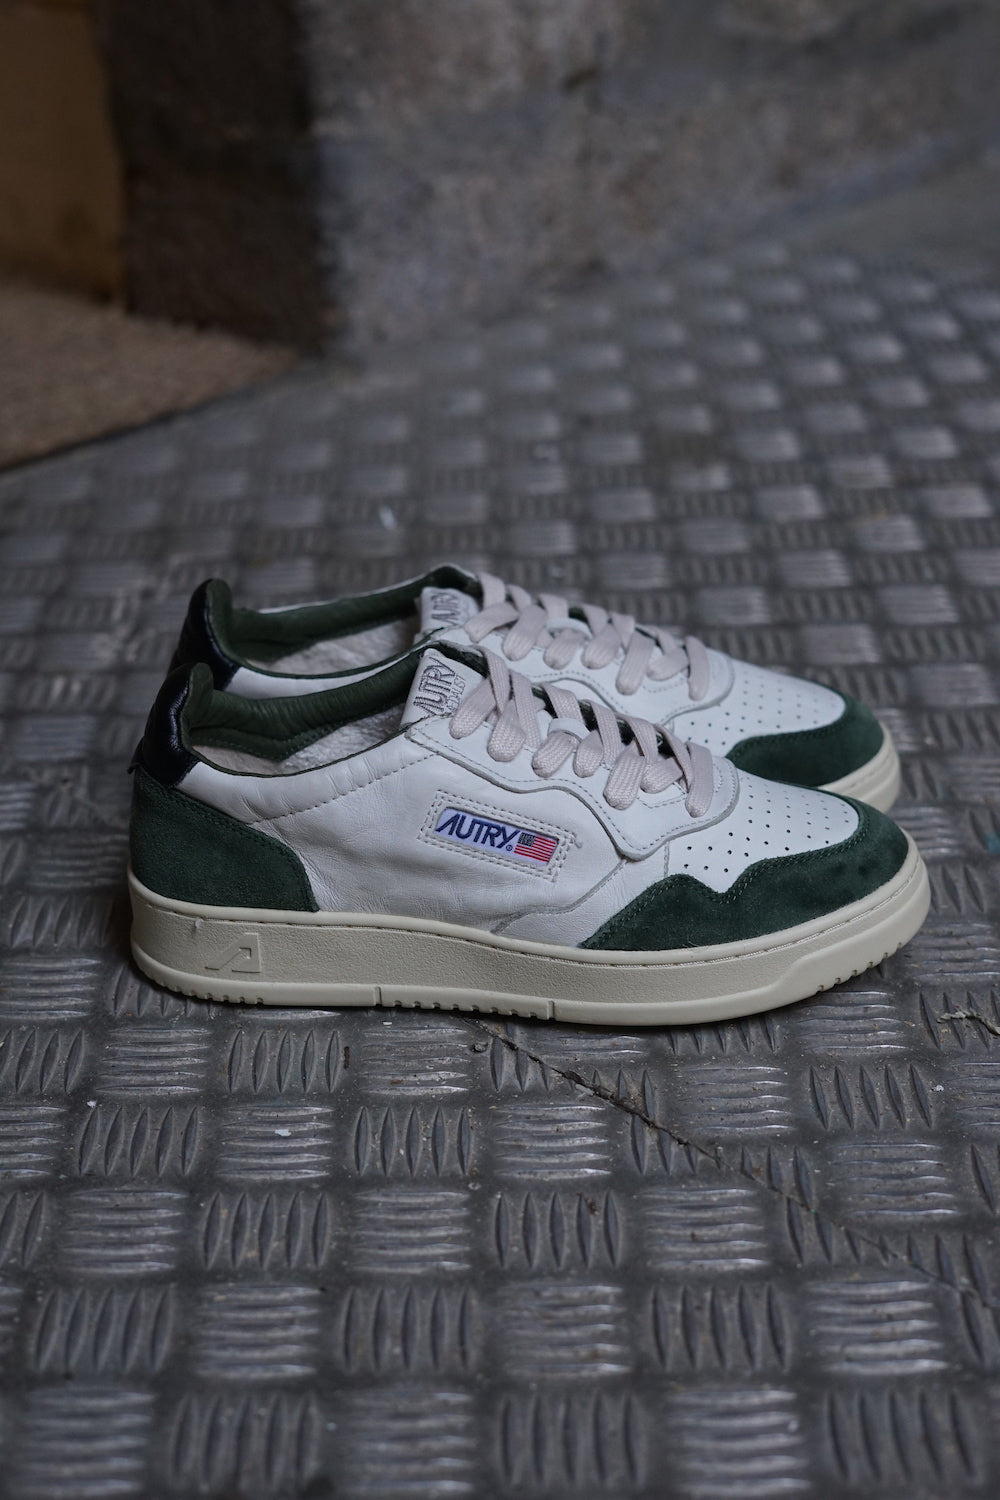 Autry sneakers green and white